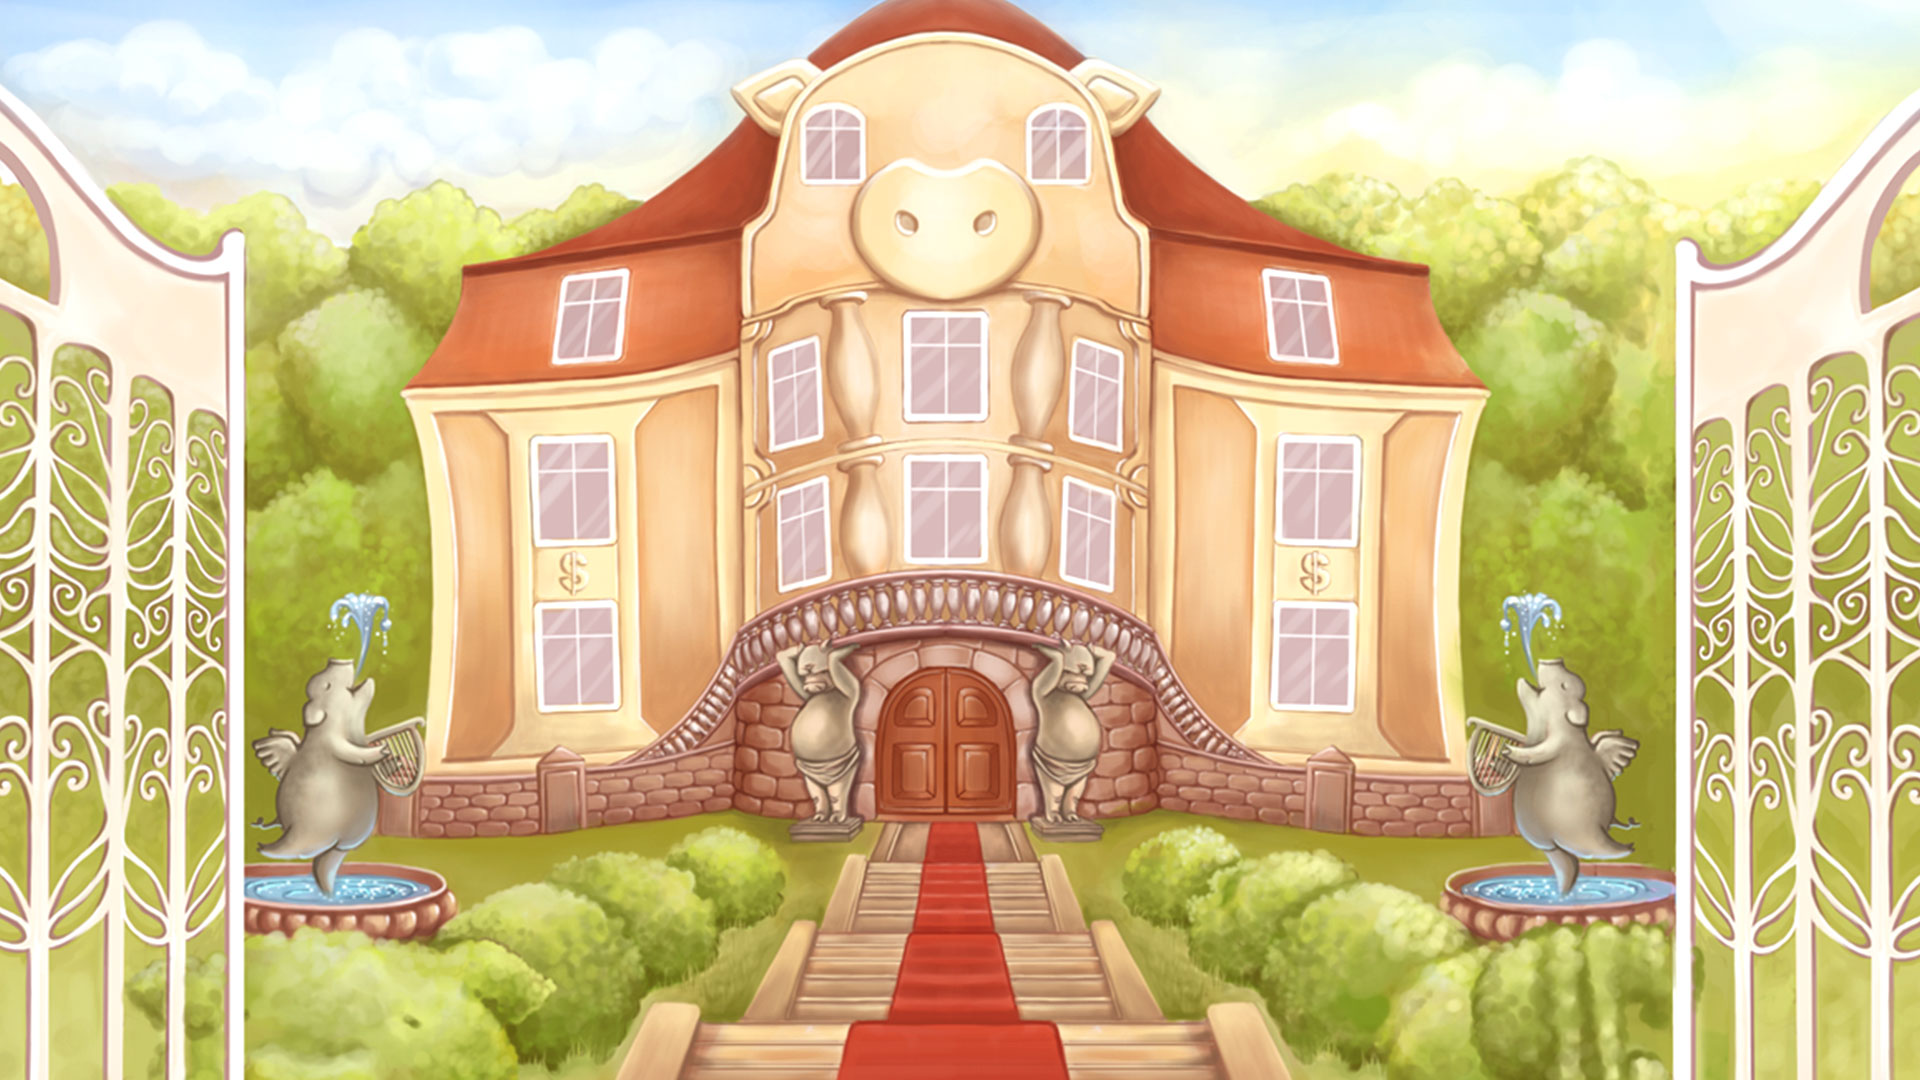 Game hight resolution background Piggy Riches